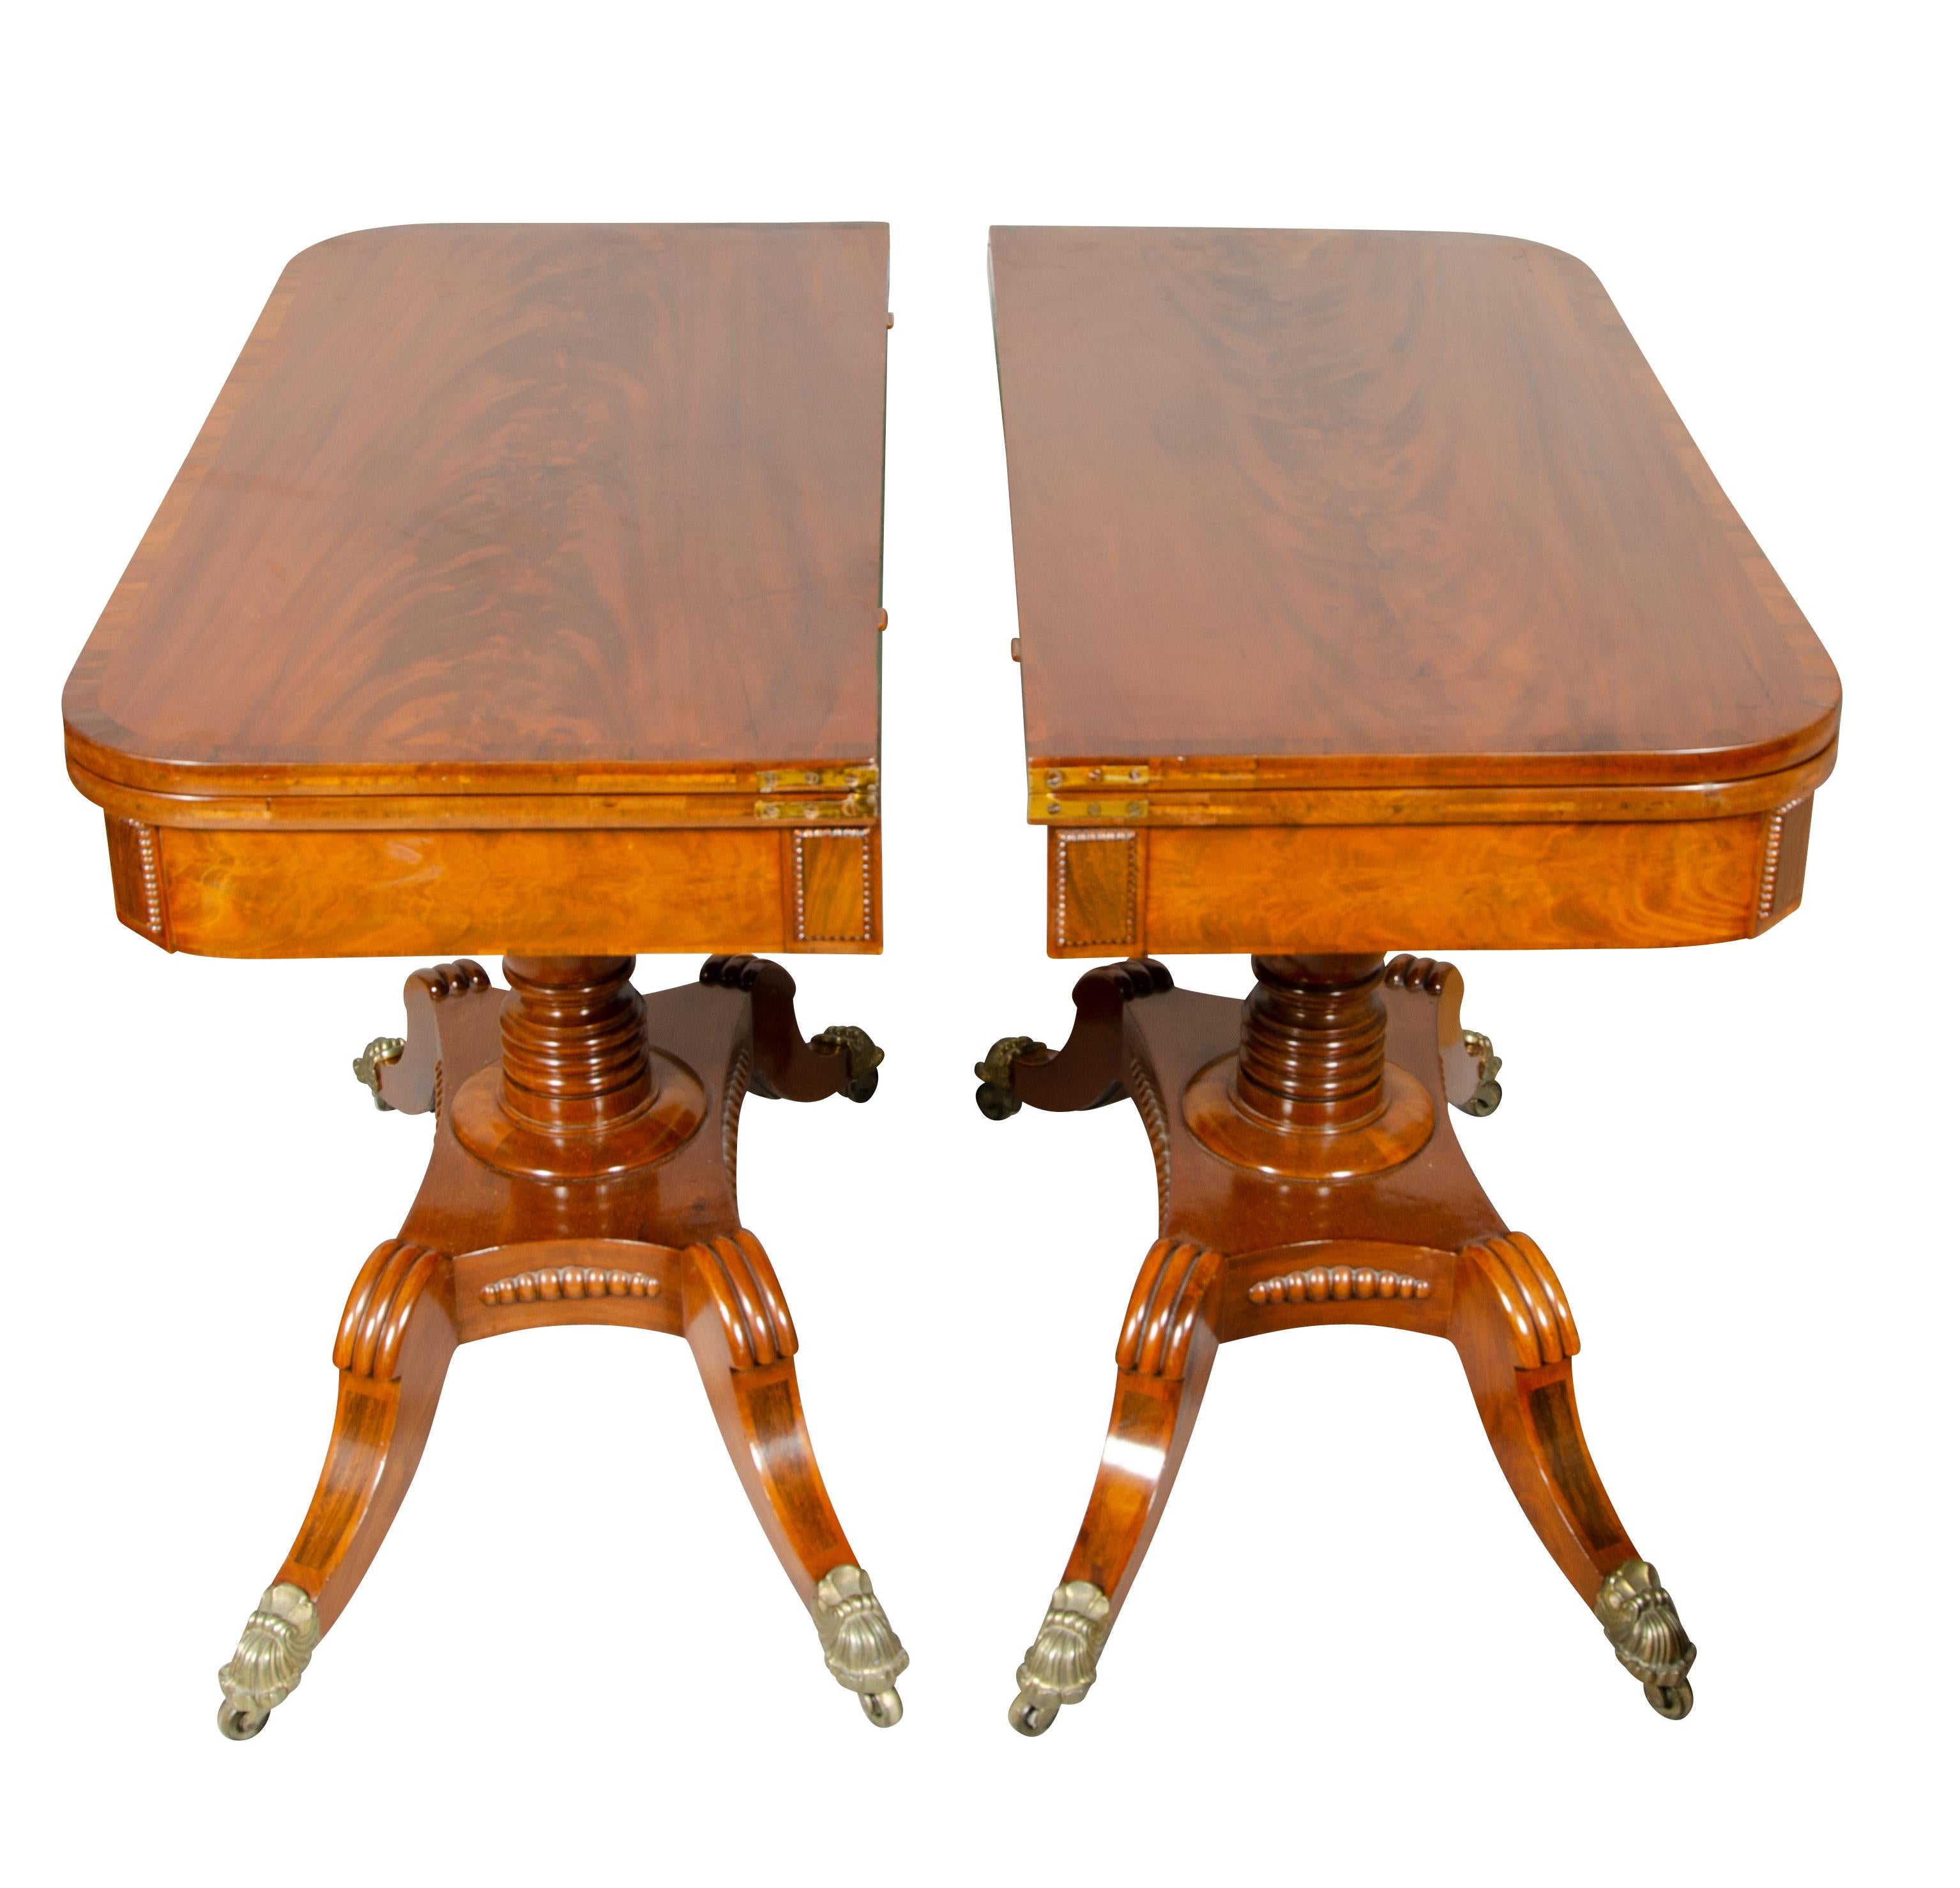 Pair of Regency Mahogany Games Tables In Good Condition For Sale In Essex, MA